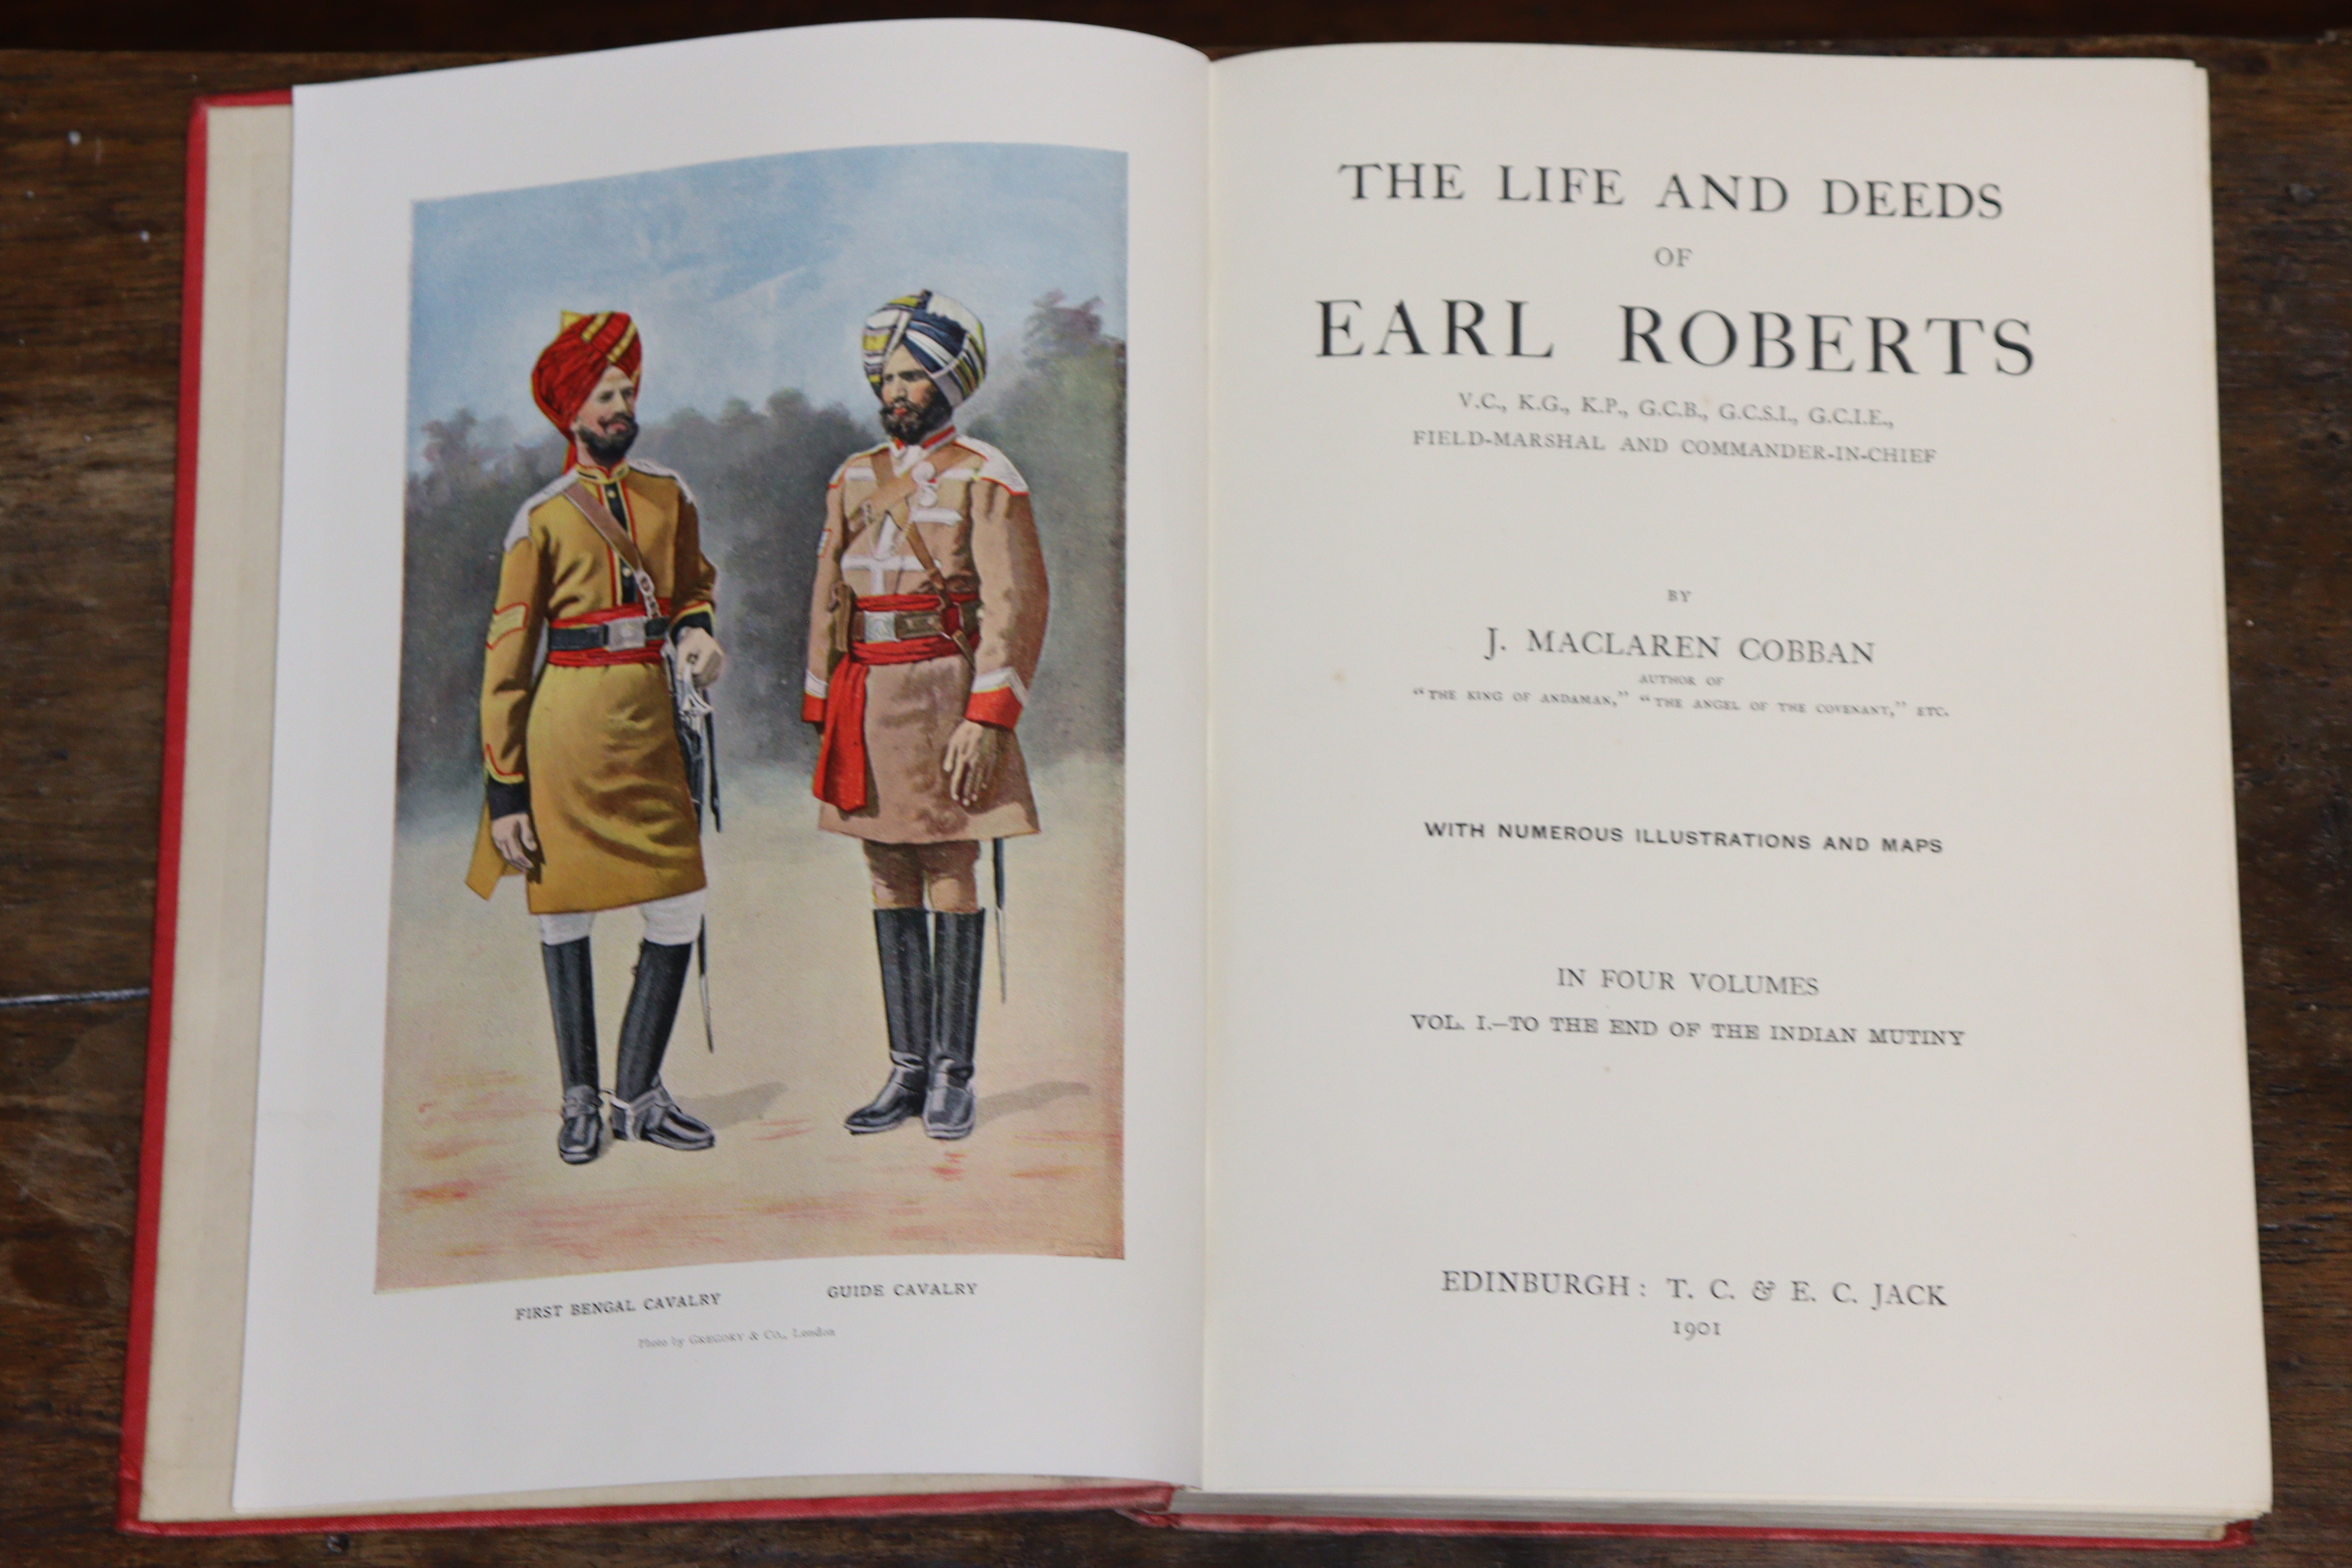 COBBAN, J. Maclaren; “Life and Deeds of Earl Roberts”, 4 vols., published by Caxton Publishing - Image 2 of 2